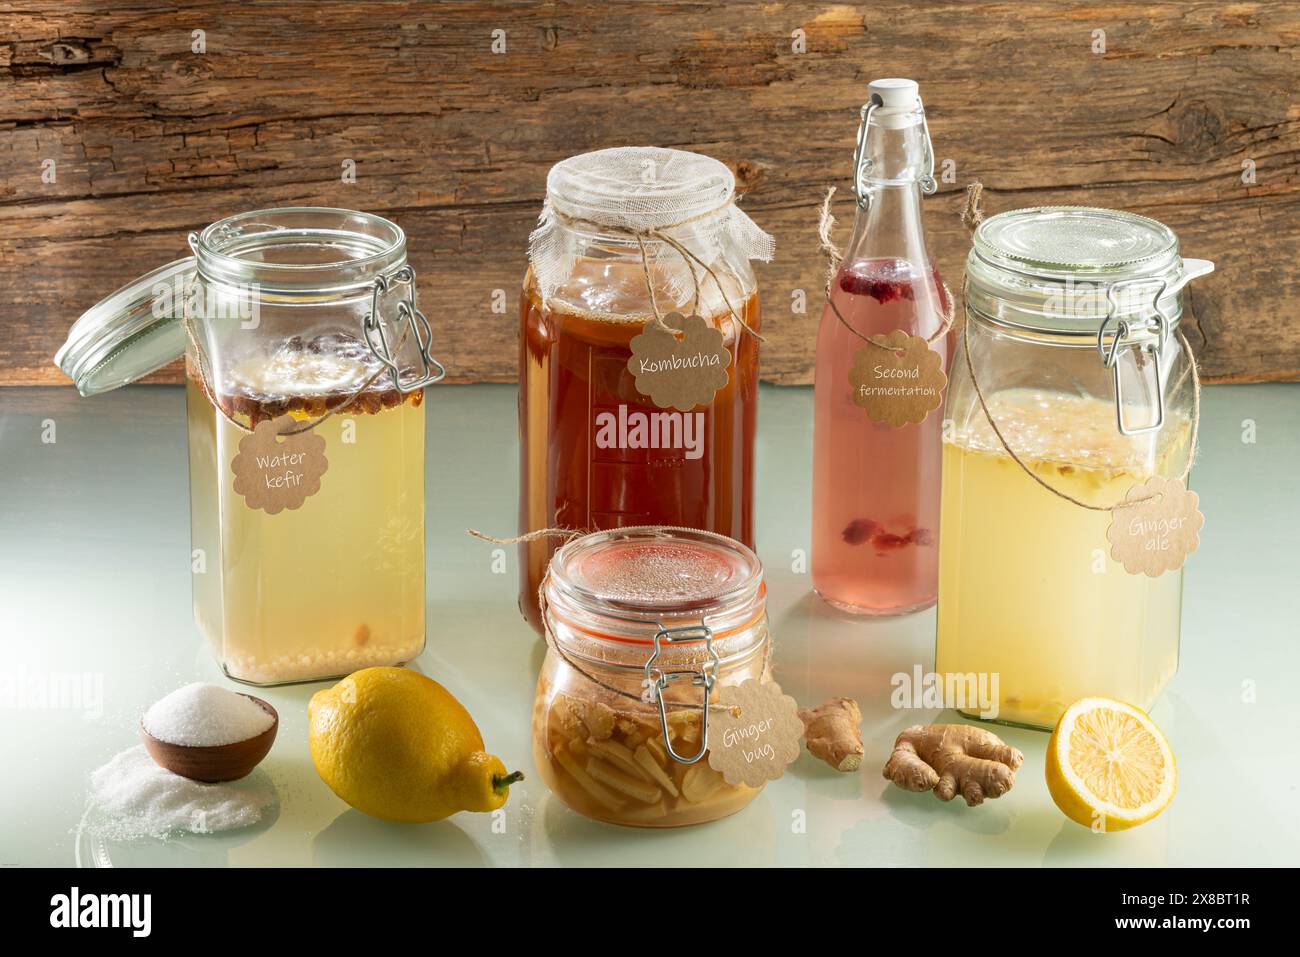 Fermented probiotic beverages - Water Kefir, Kobucha, Ginger Ale, Ginger Bug with cardboard signs and fruits Stock Photo